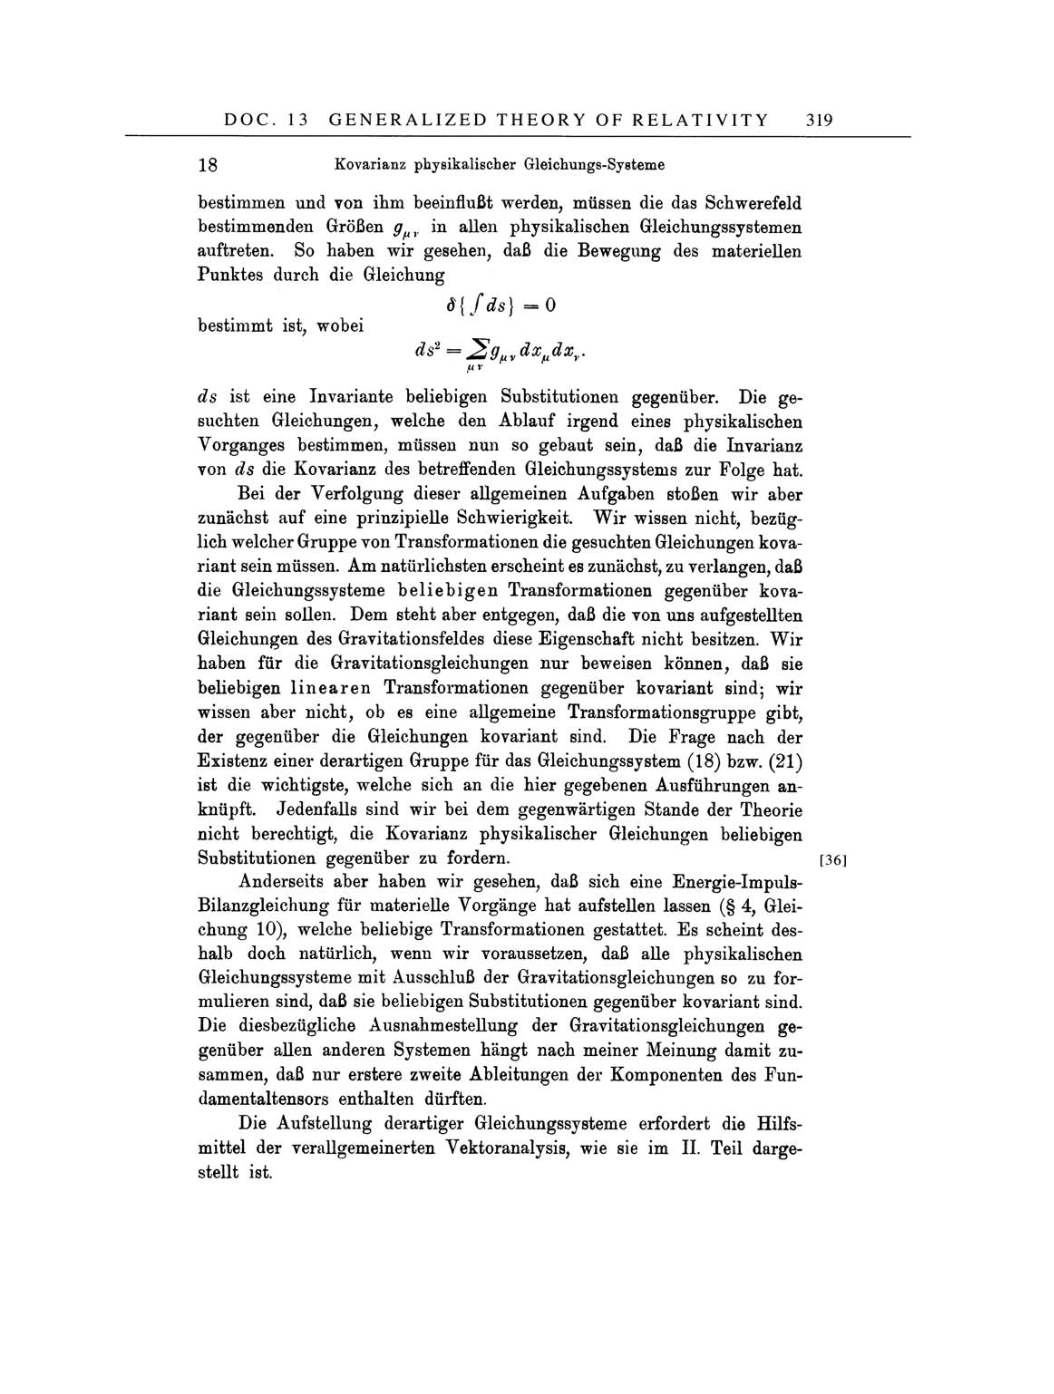 Volume 4: The Swiss Years: Writings 1912-1914 page 319